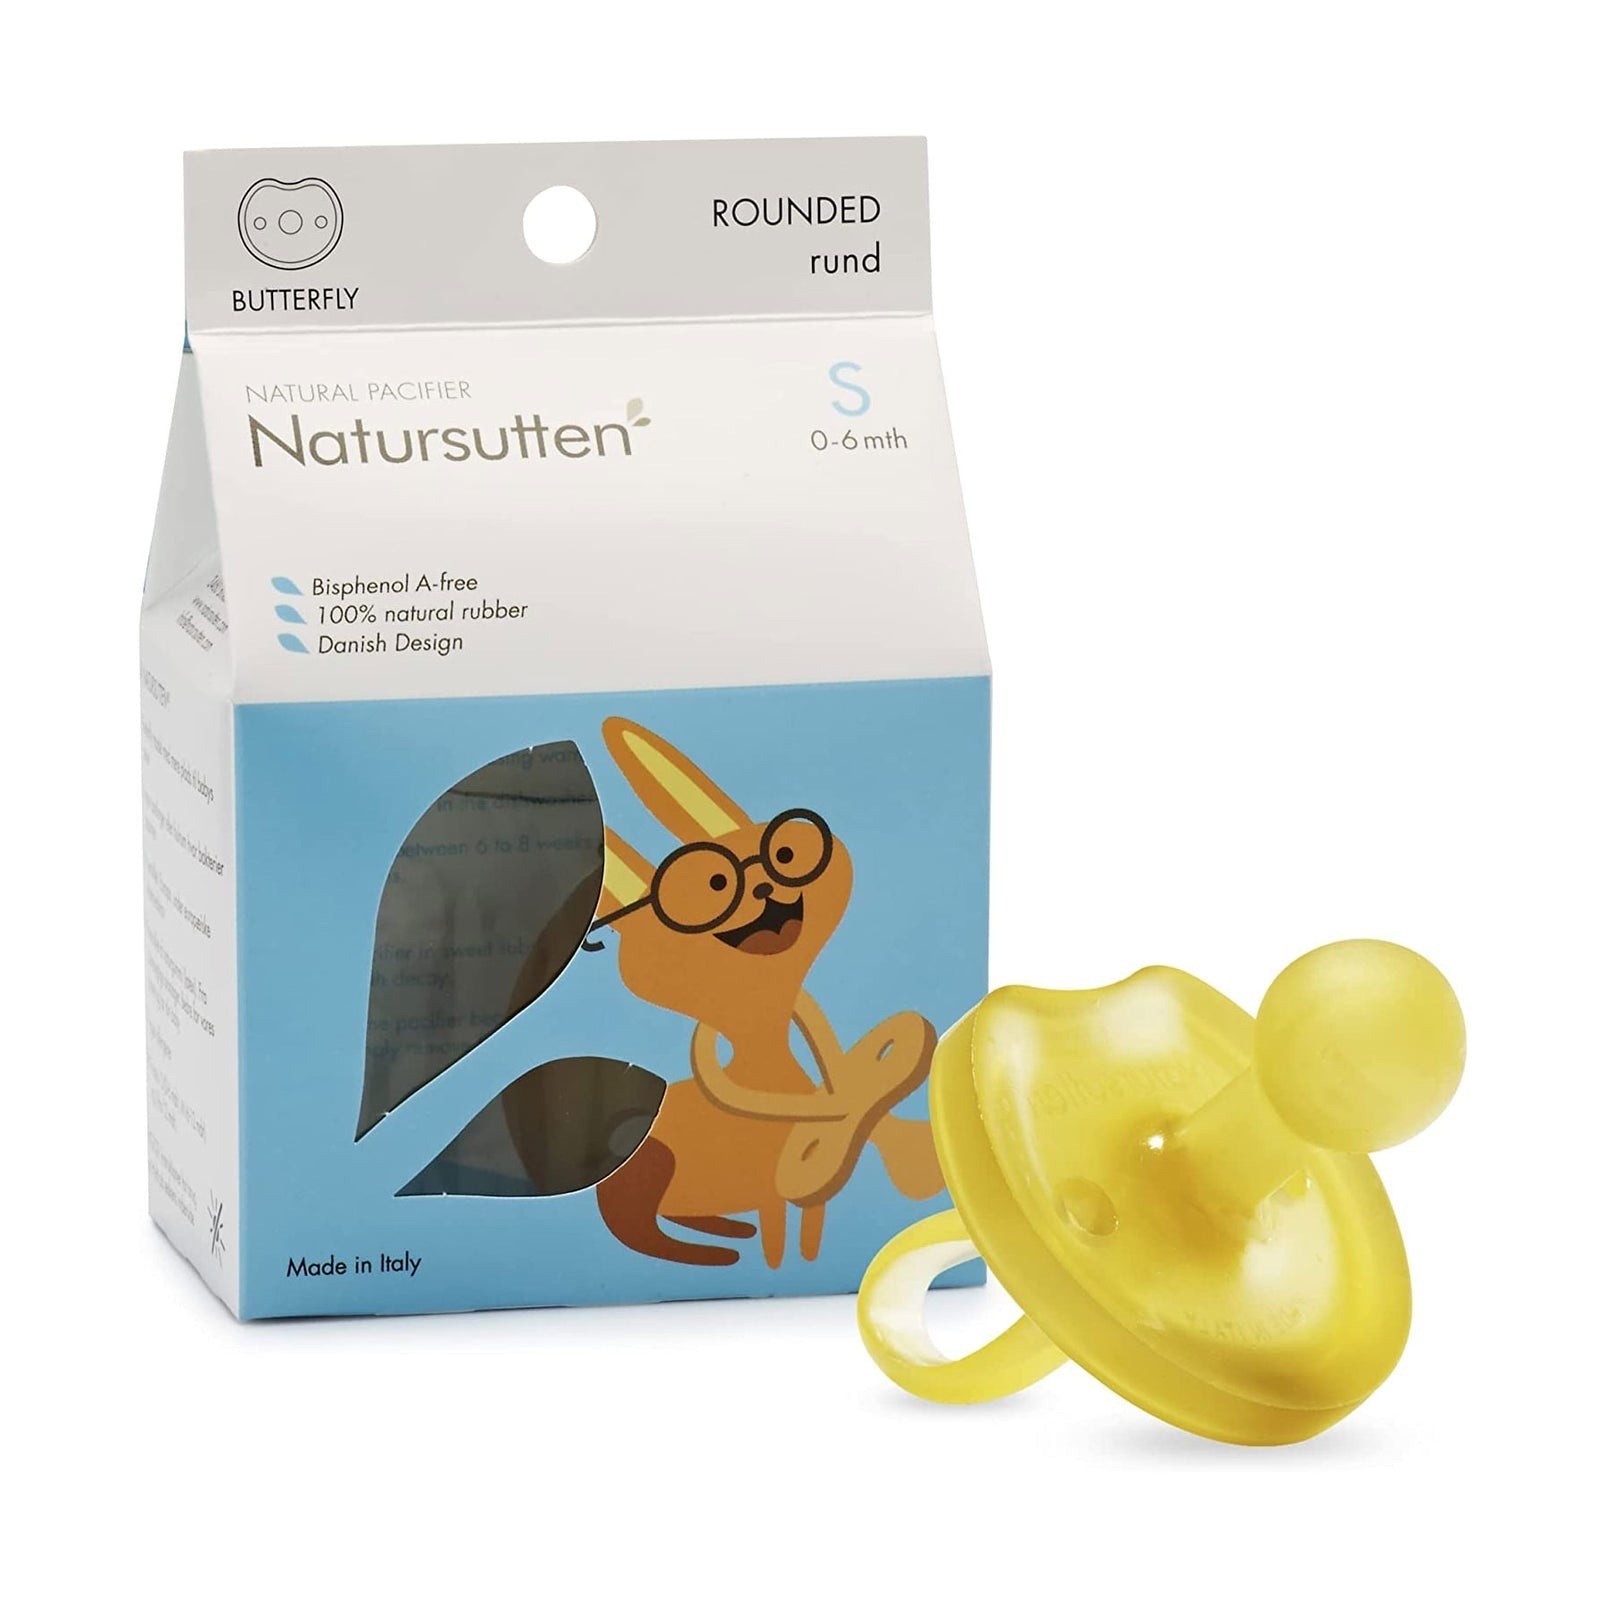 Natursutten Butterfly Rounded